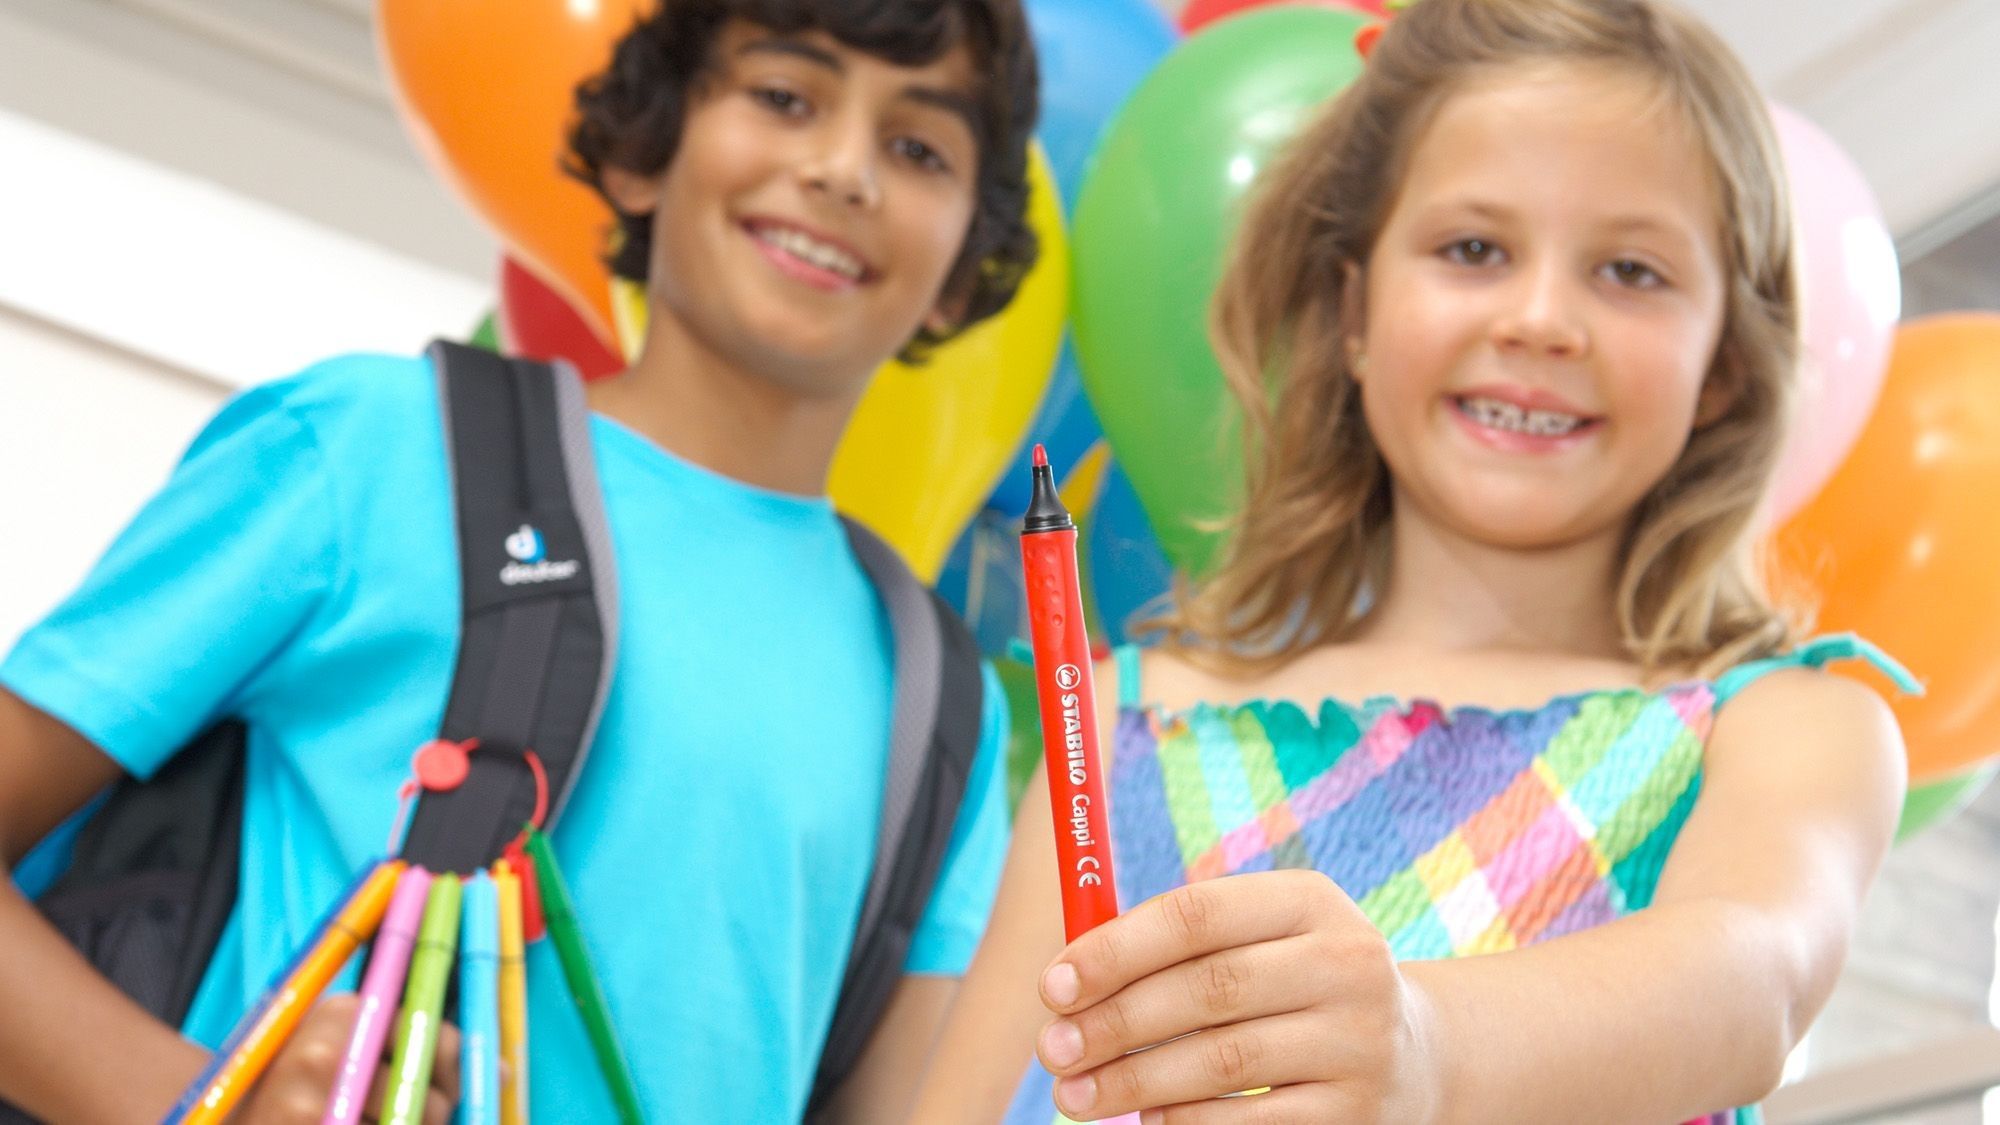 Mood picture of children with Stabilo Cappi pens